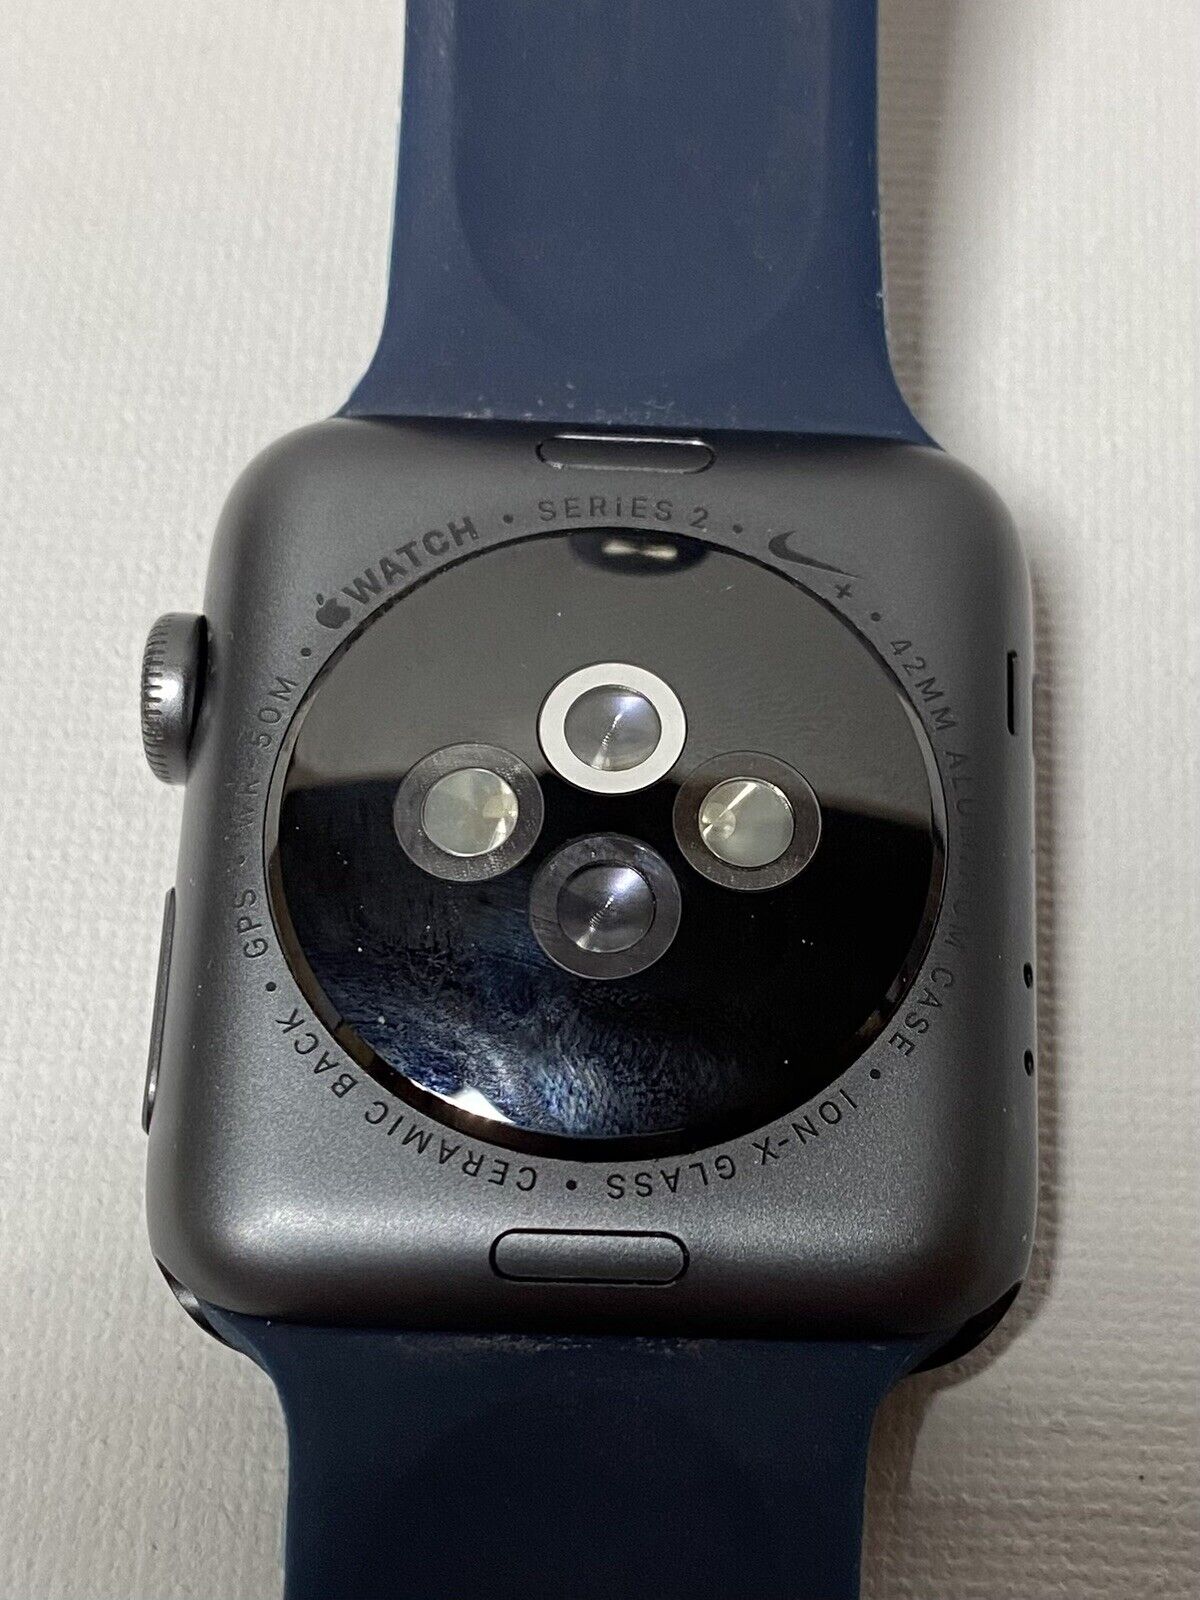 Apple Watch Series 2 Nike+ - 42mm Aluminum Case - Blue Band - GPS - WR 50M  USED